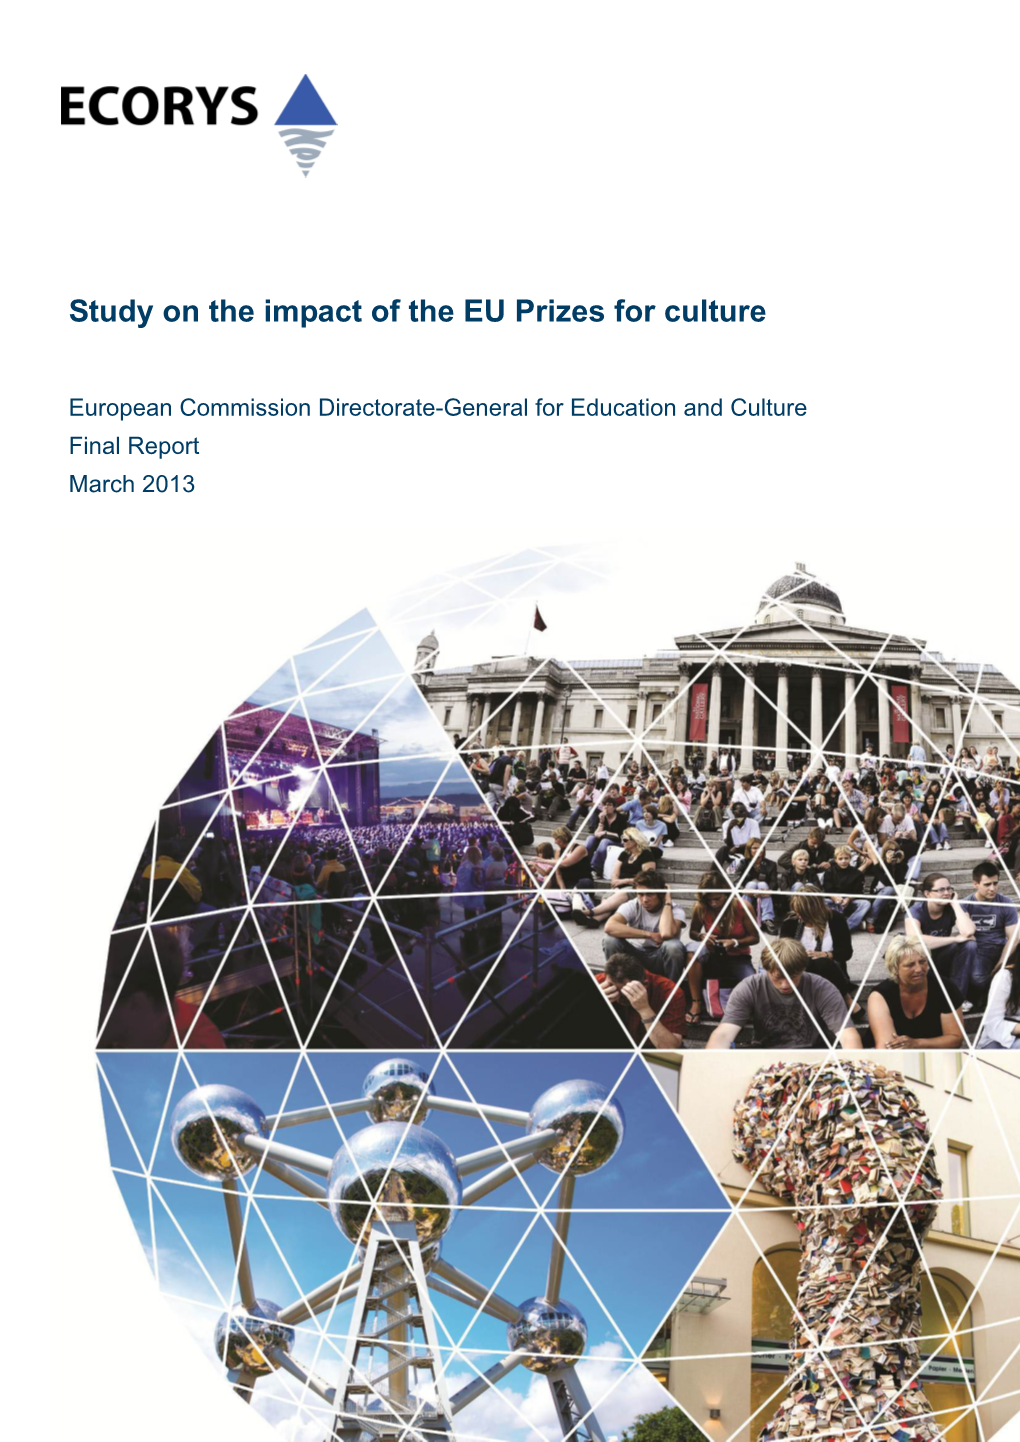 Study on the Impact of the EU Prizes for Culture